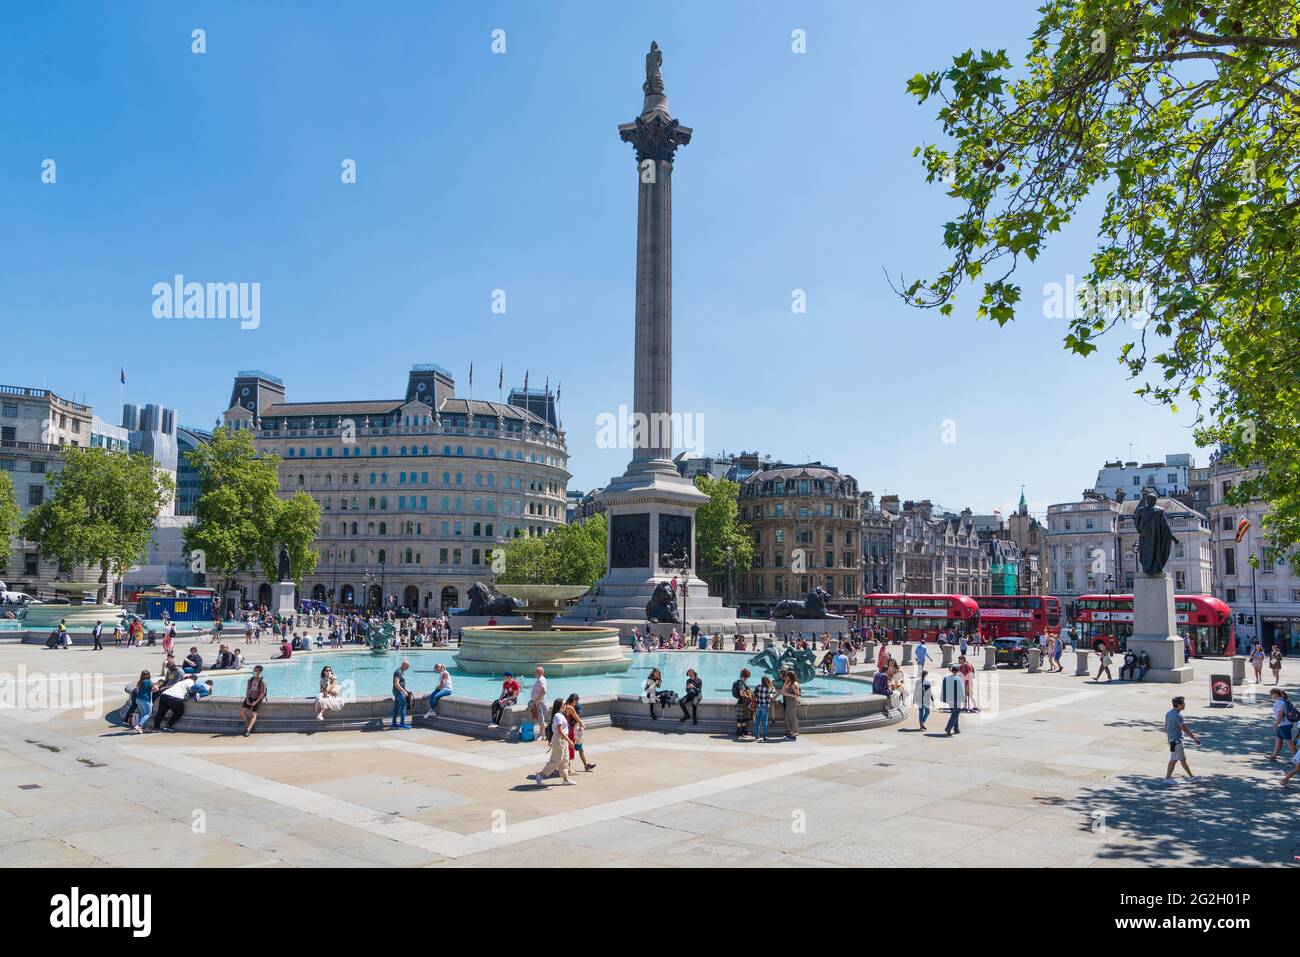 People out and about, relaxing and enjoying a warm, sunny day in Trafalgar Square, London, England, UK Stock Photo